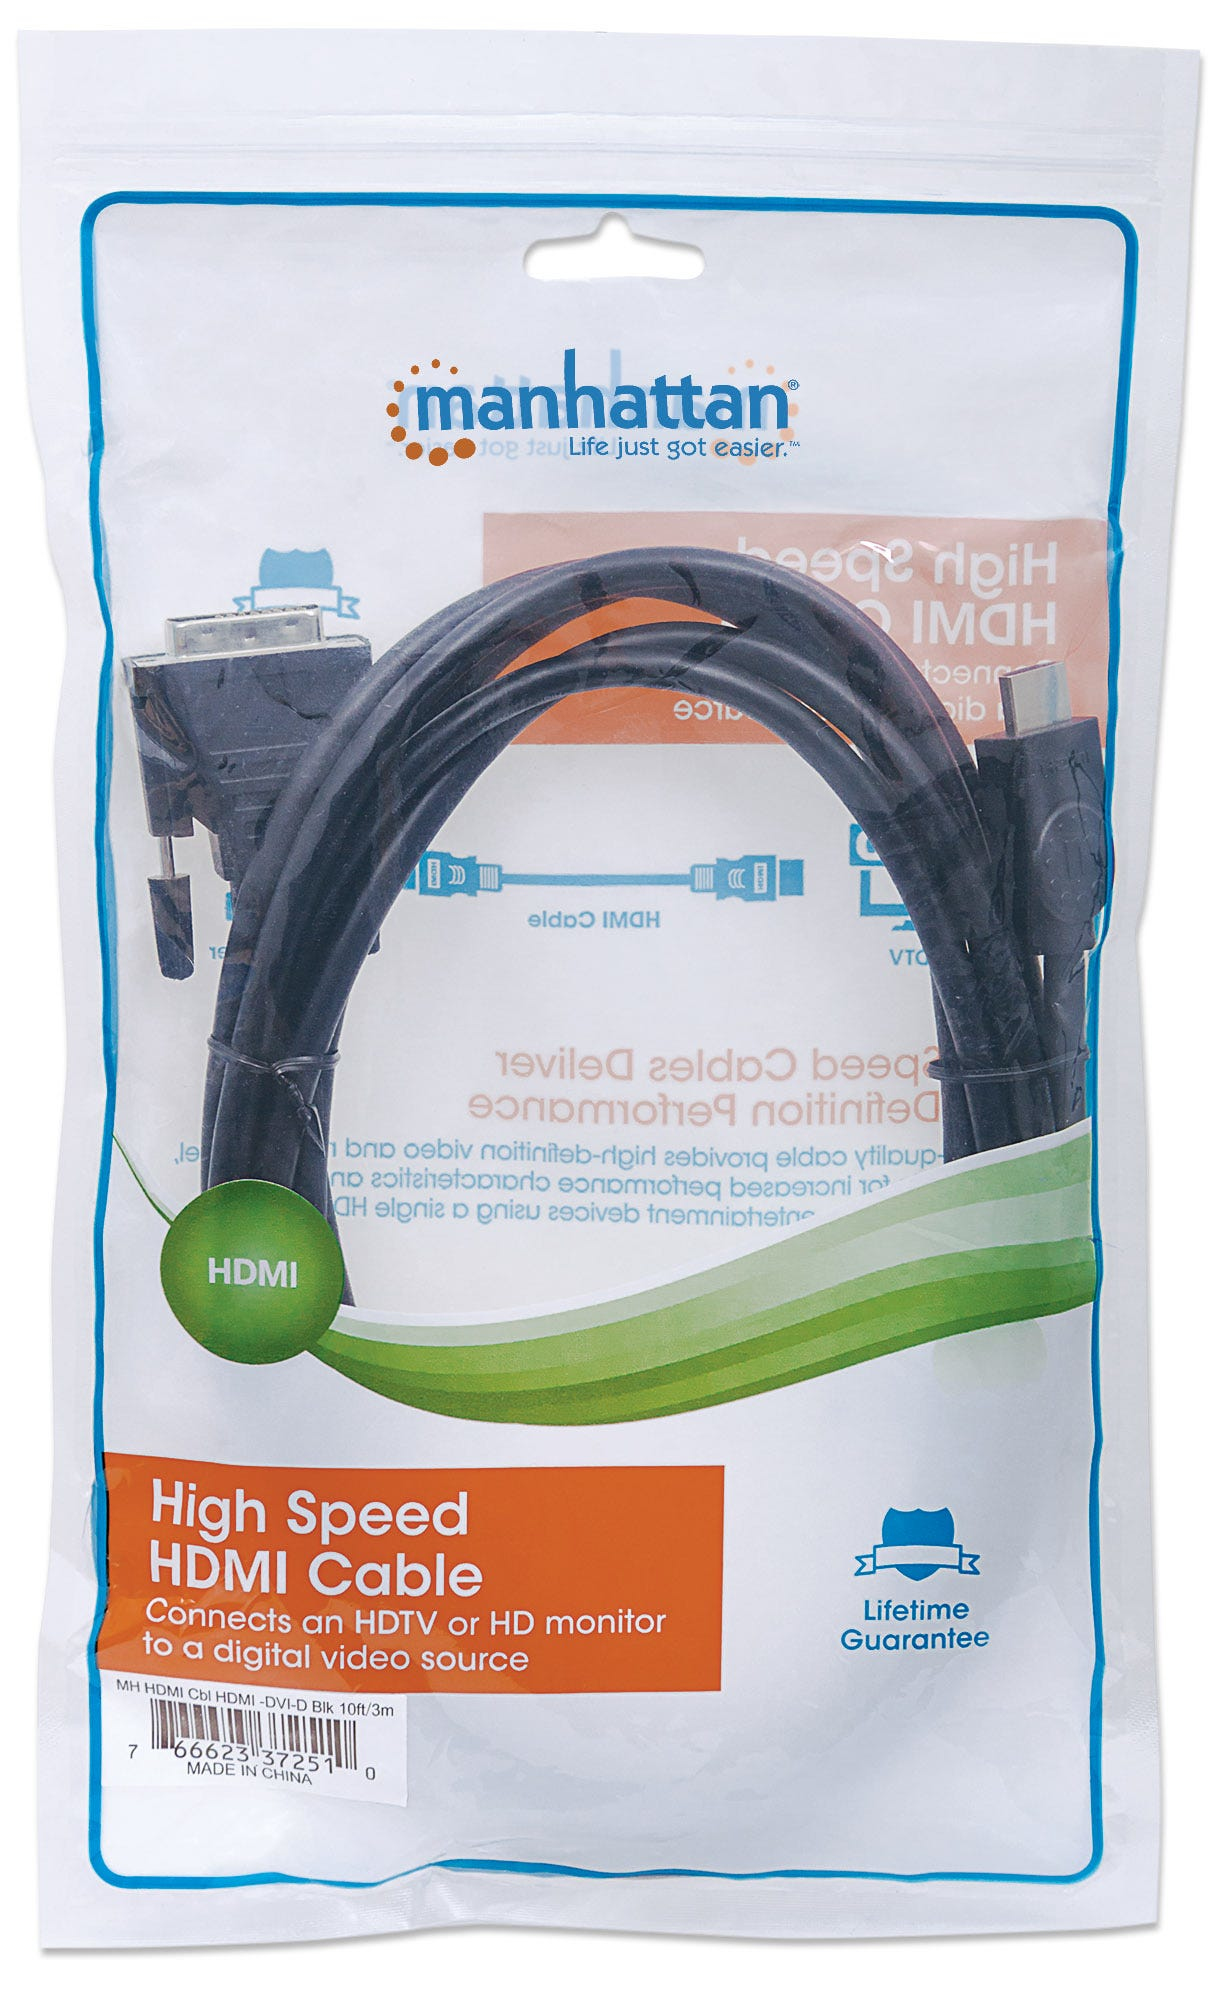 Manhattan HDMI to DVI-D 24+1 Cable, 3m, Male to Male, Black, Equivalent to Startech HDDVIMM3M, Dual Link, Compatible with DVD-D, Lifetime Warranty, Polybag